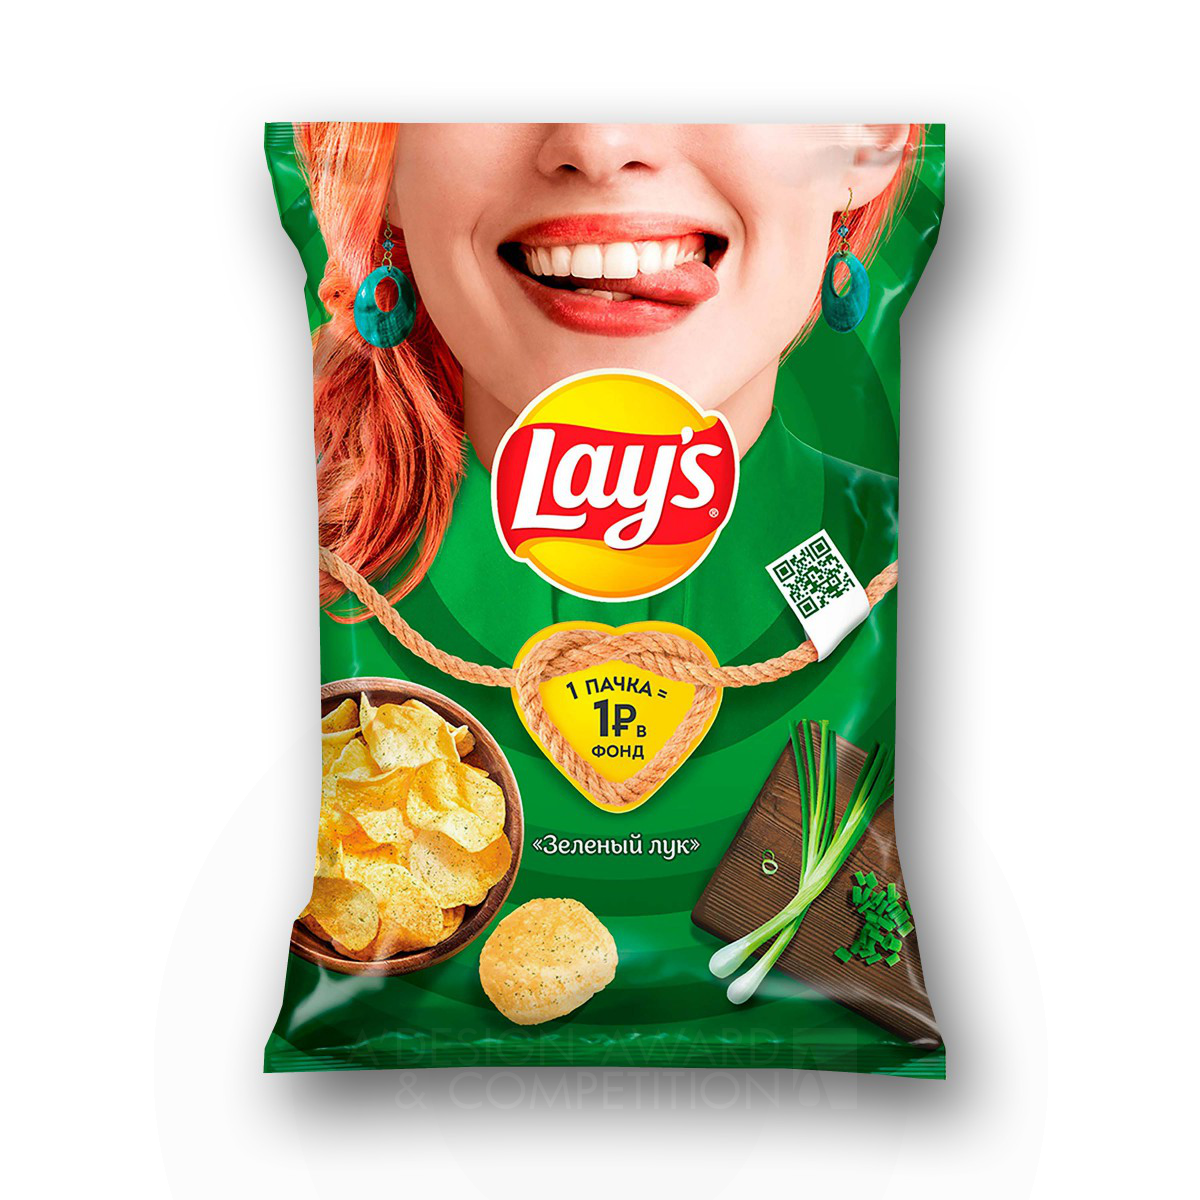 Lay's Smiles Campaign